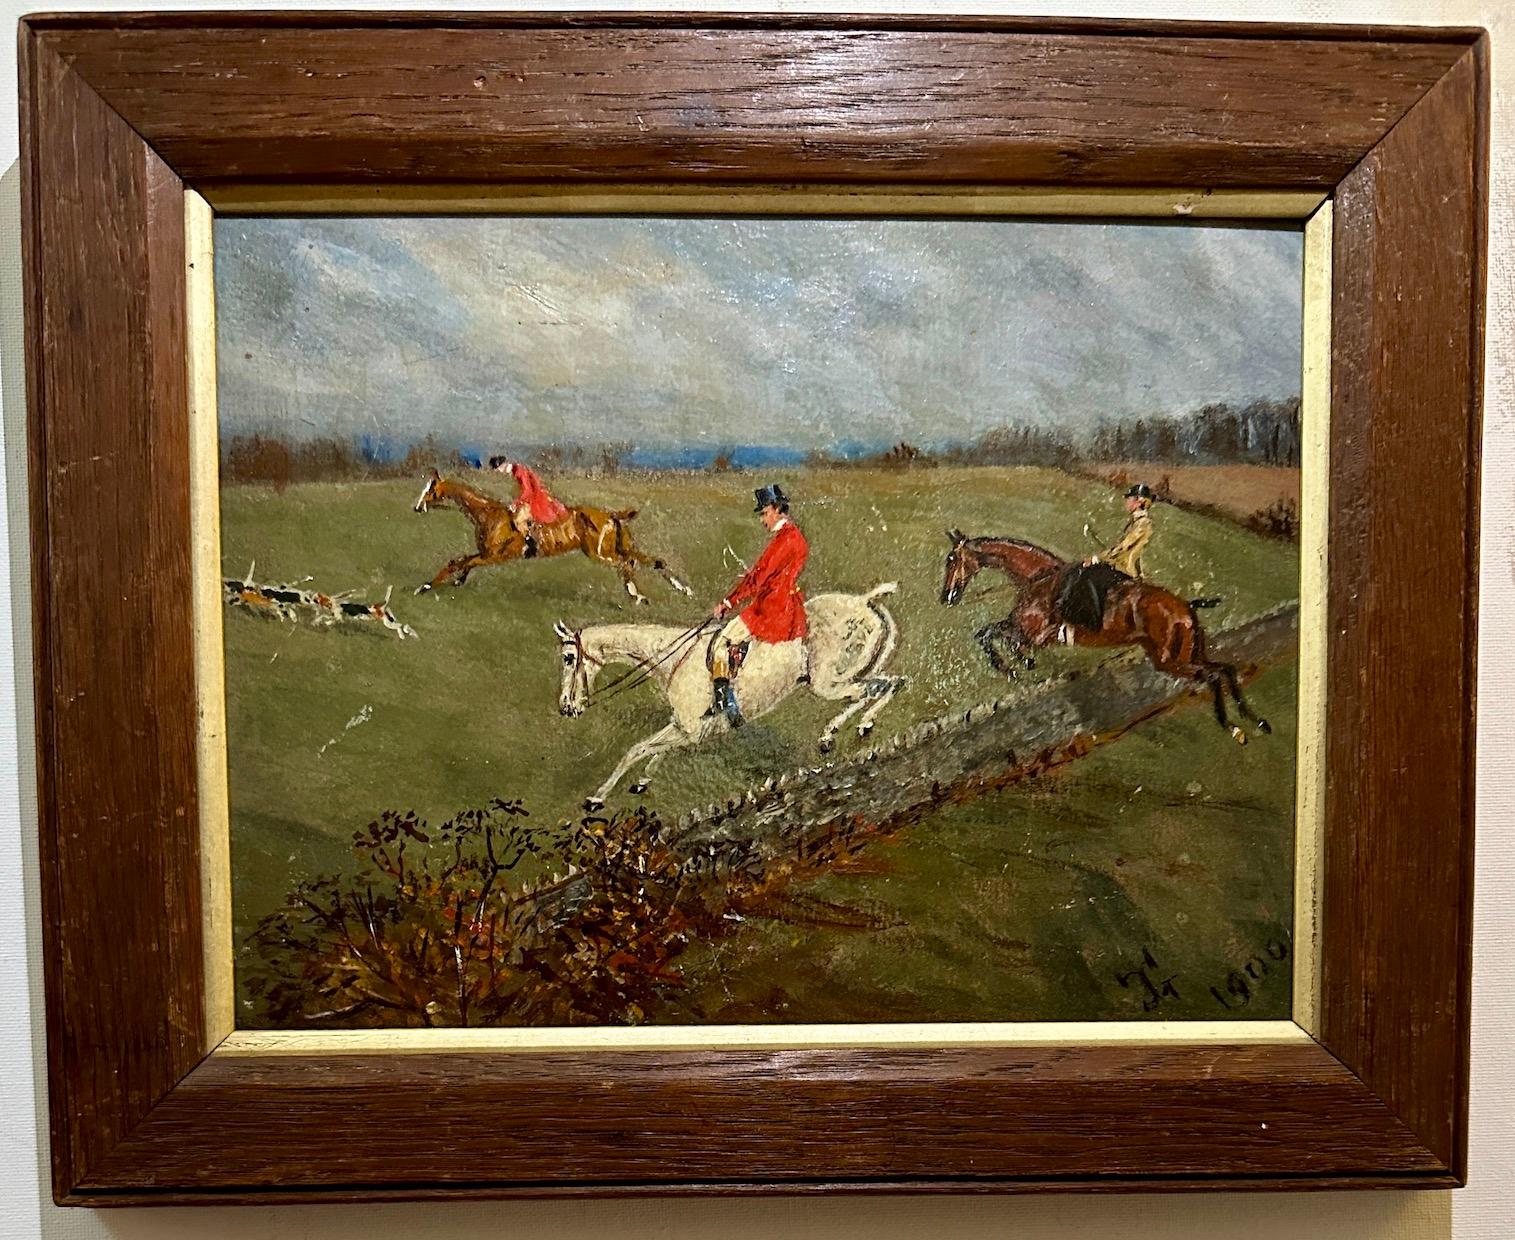 Tom Ivester Lloyd Figurative Painting - Antique English Fox hunting scene with huntsman jumping with hounds in a field